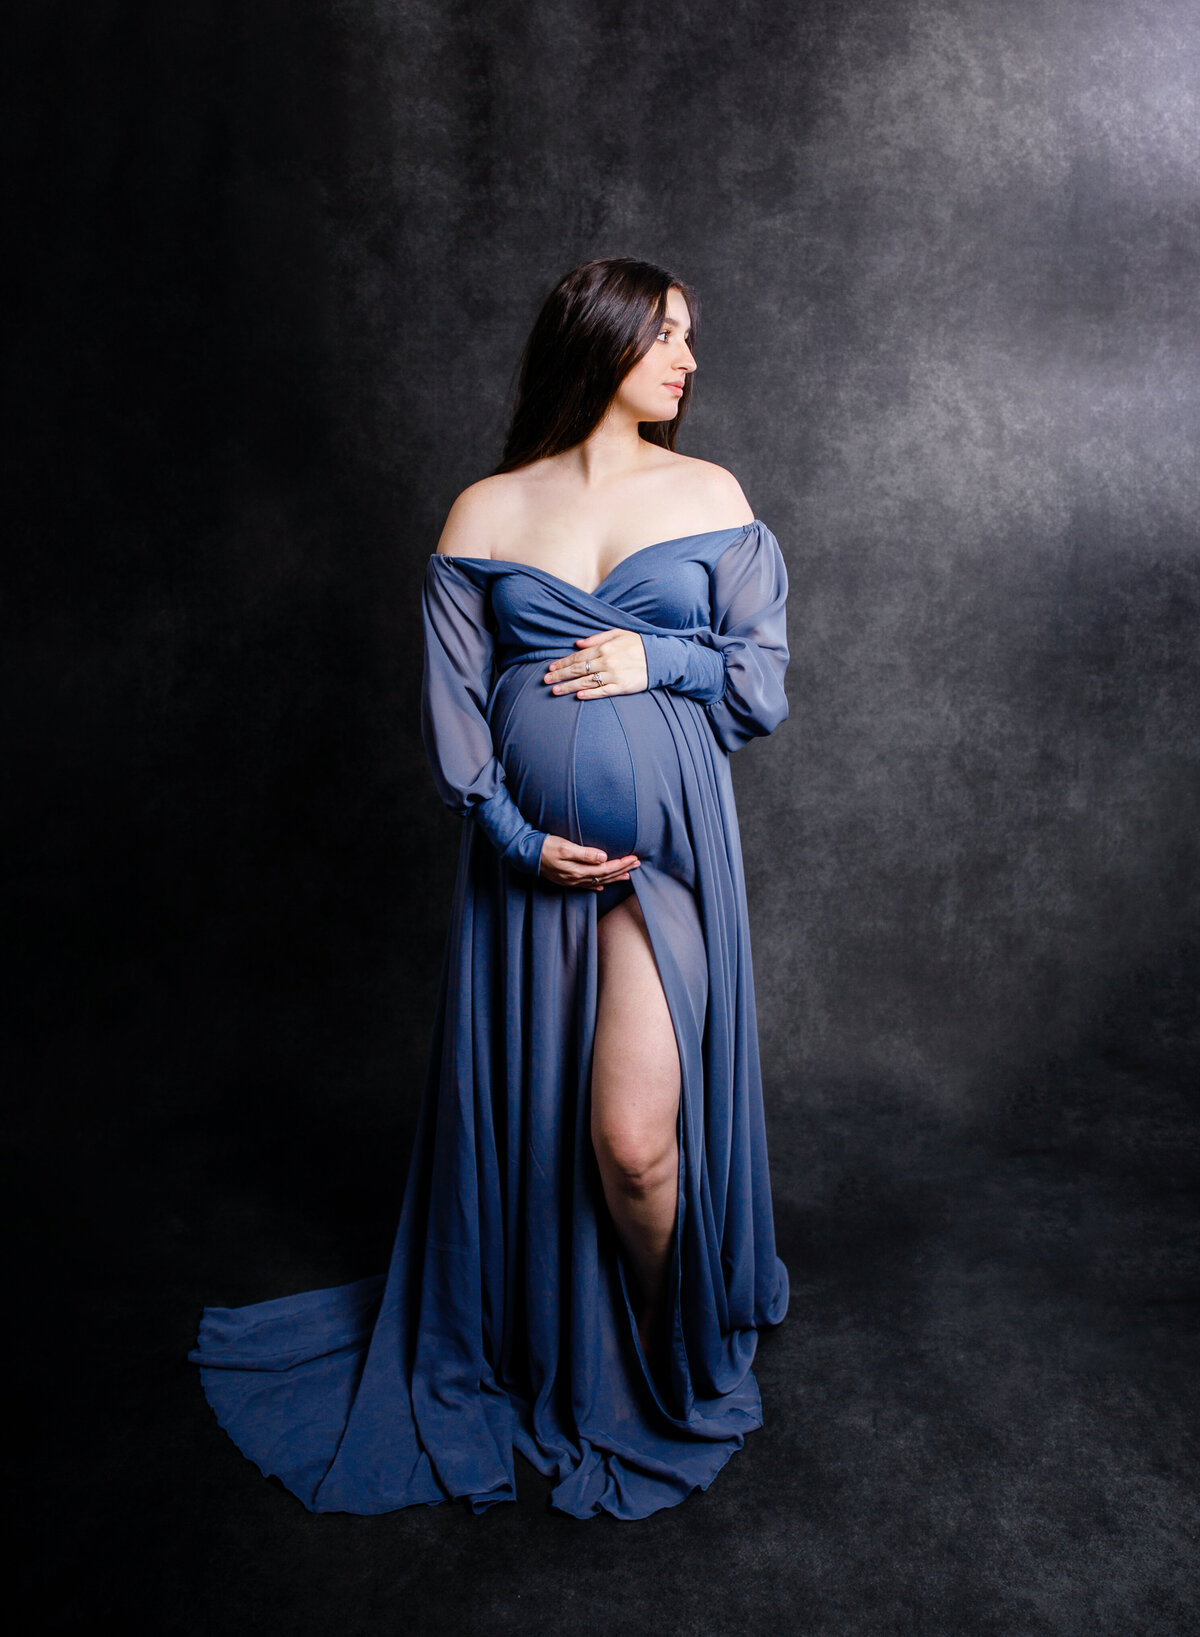 studios that have maternity gowns